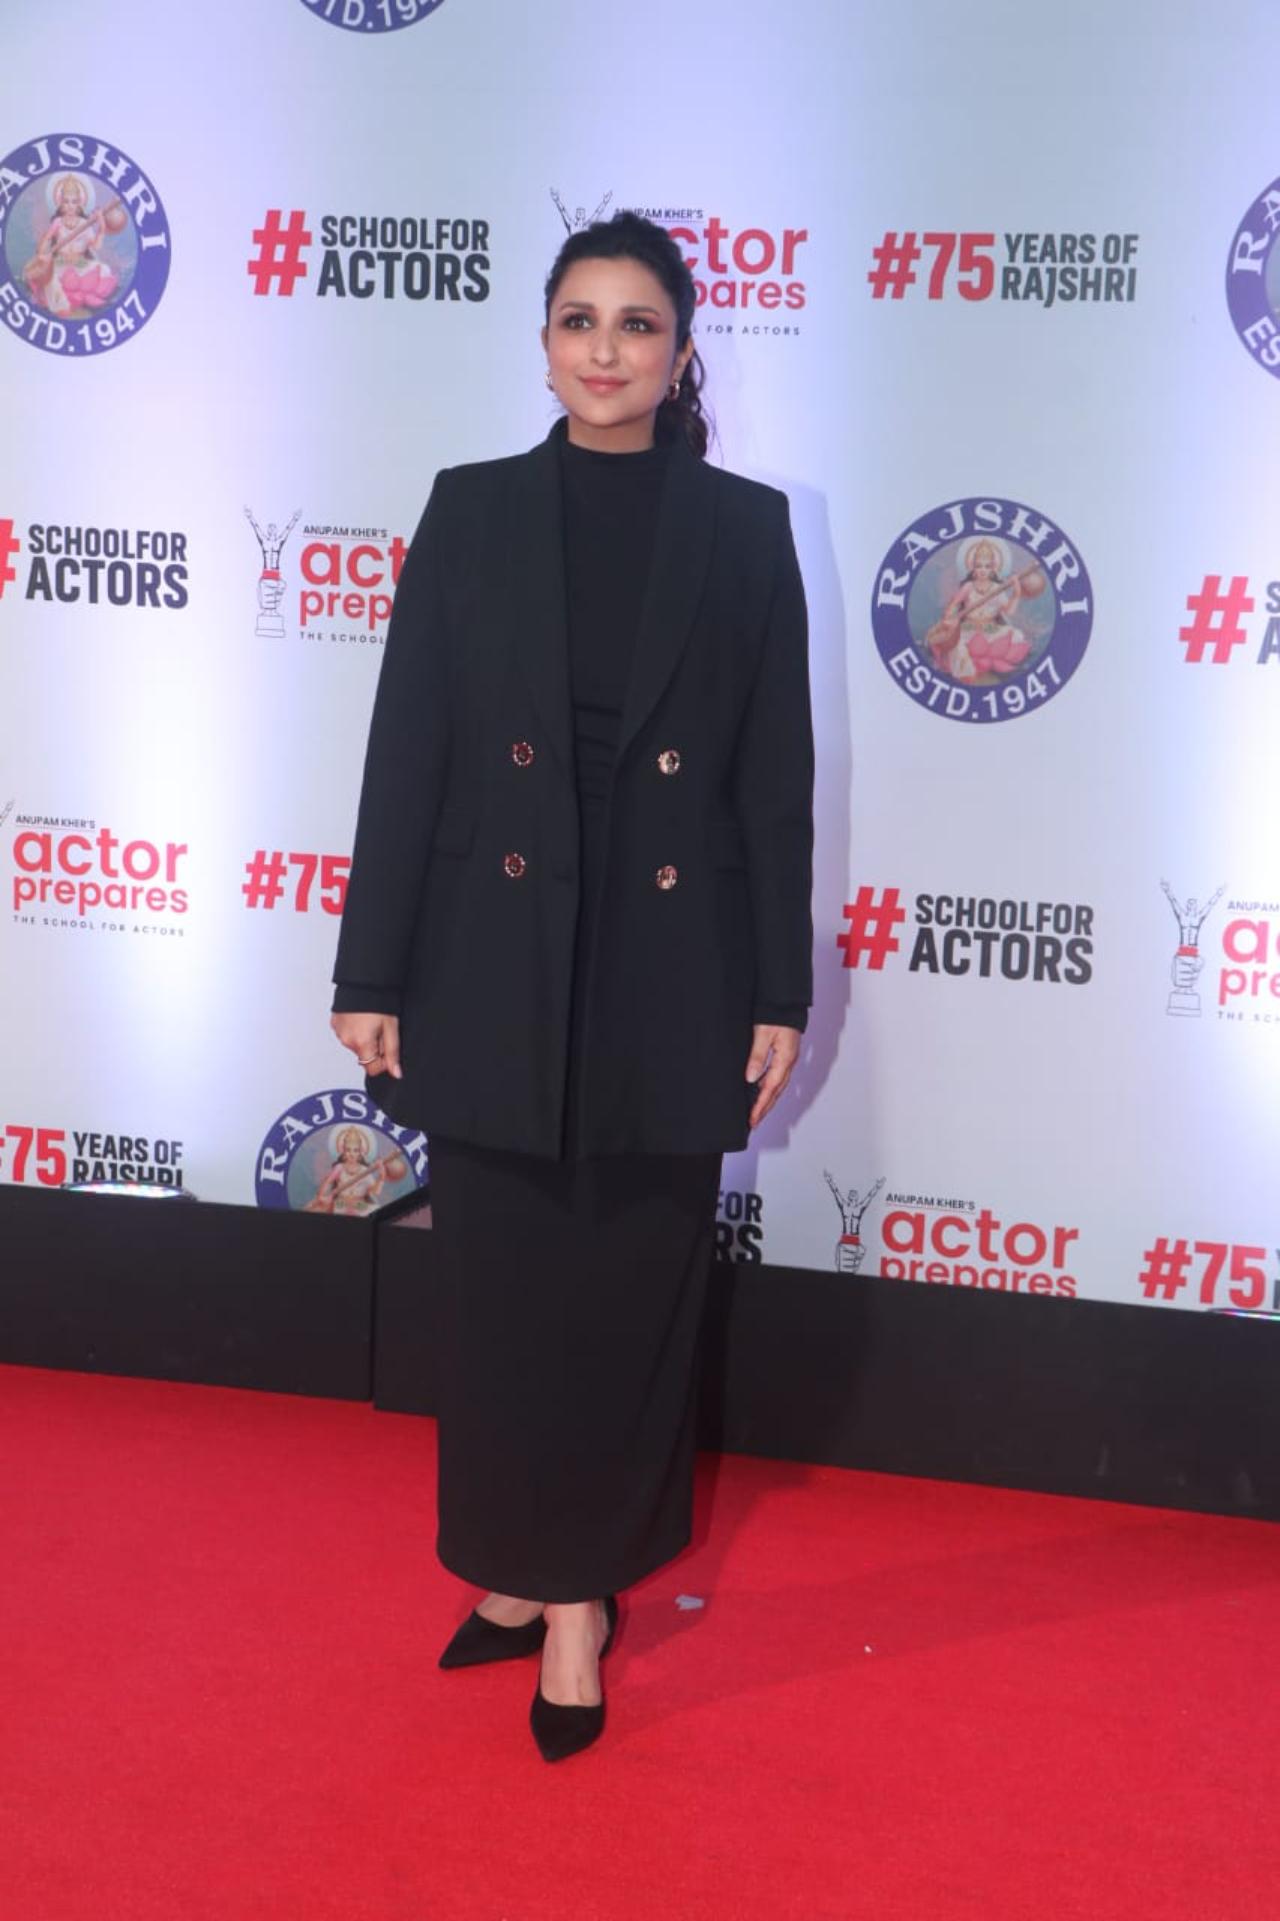 Parineeti Chopra who is a part of the film's cast arrived for the premiere in an all-black power suit. She plays the role of a trek instructor who guides Amitabh Bachchan and his friends on their trek on the Mount Everest